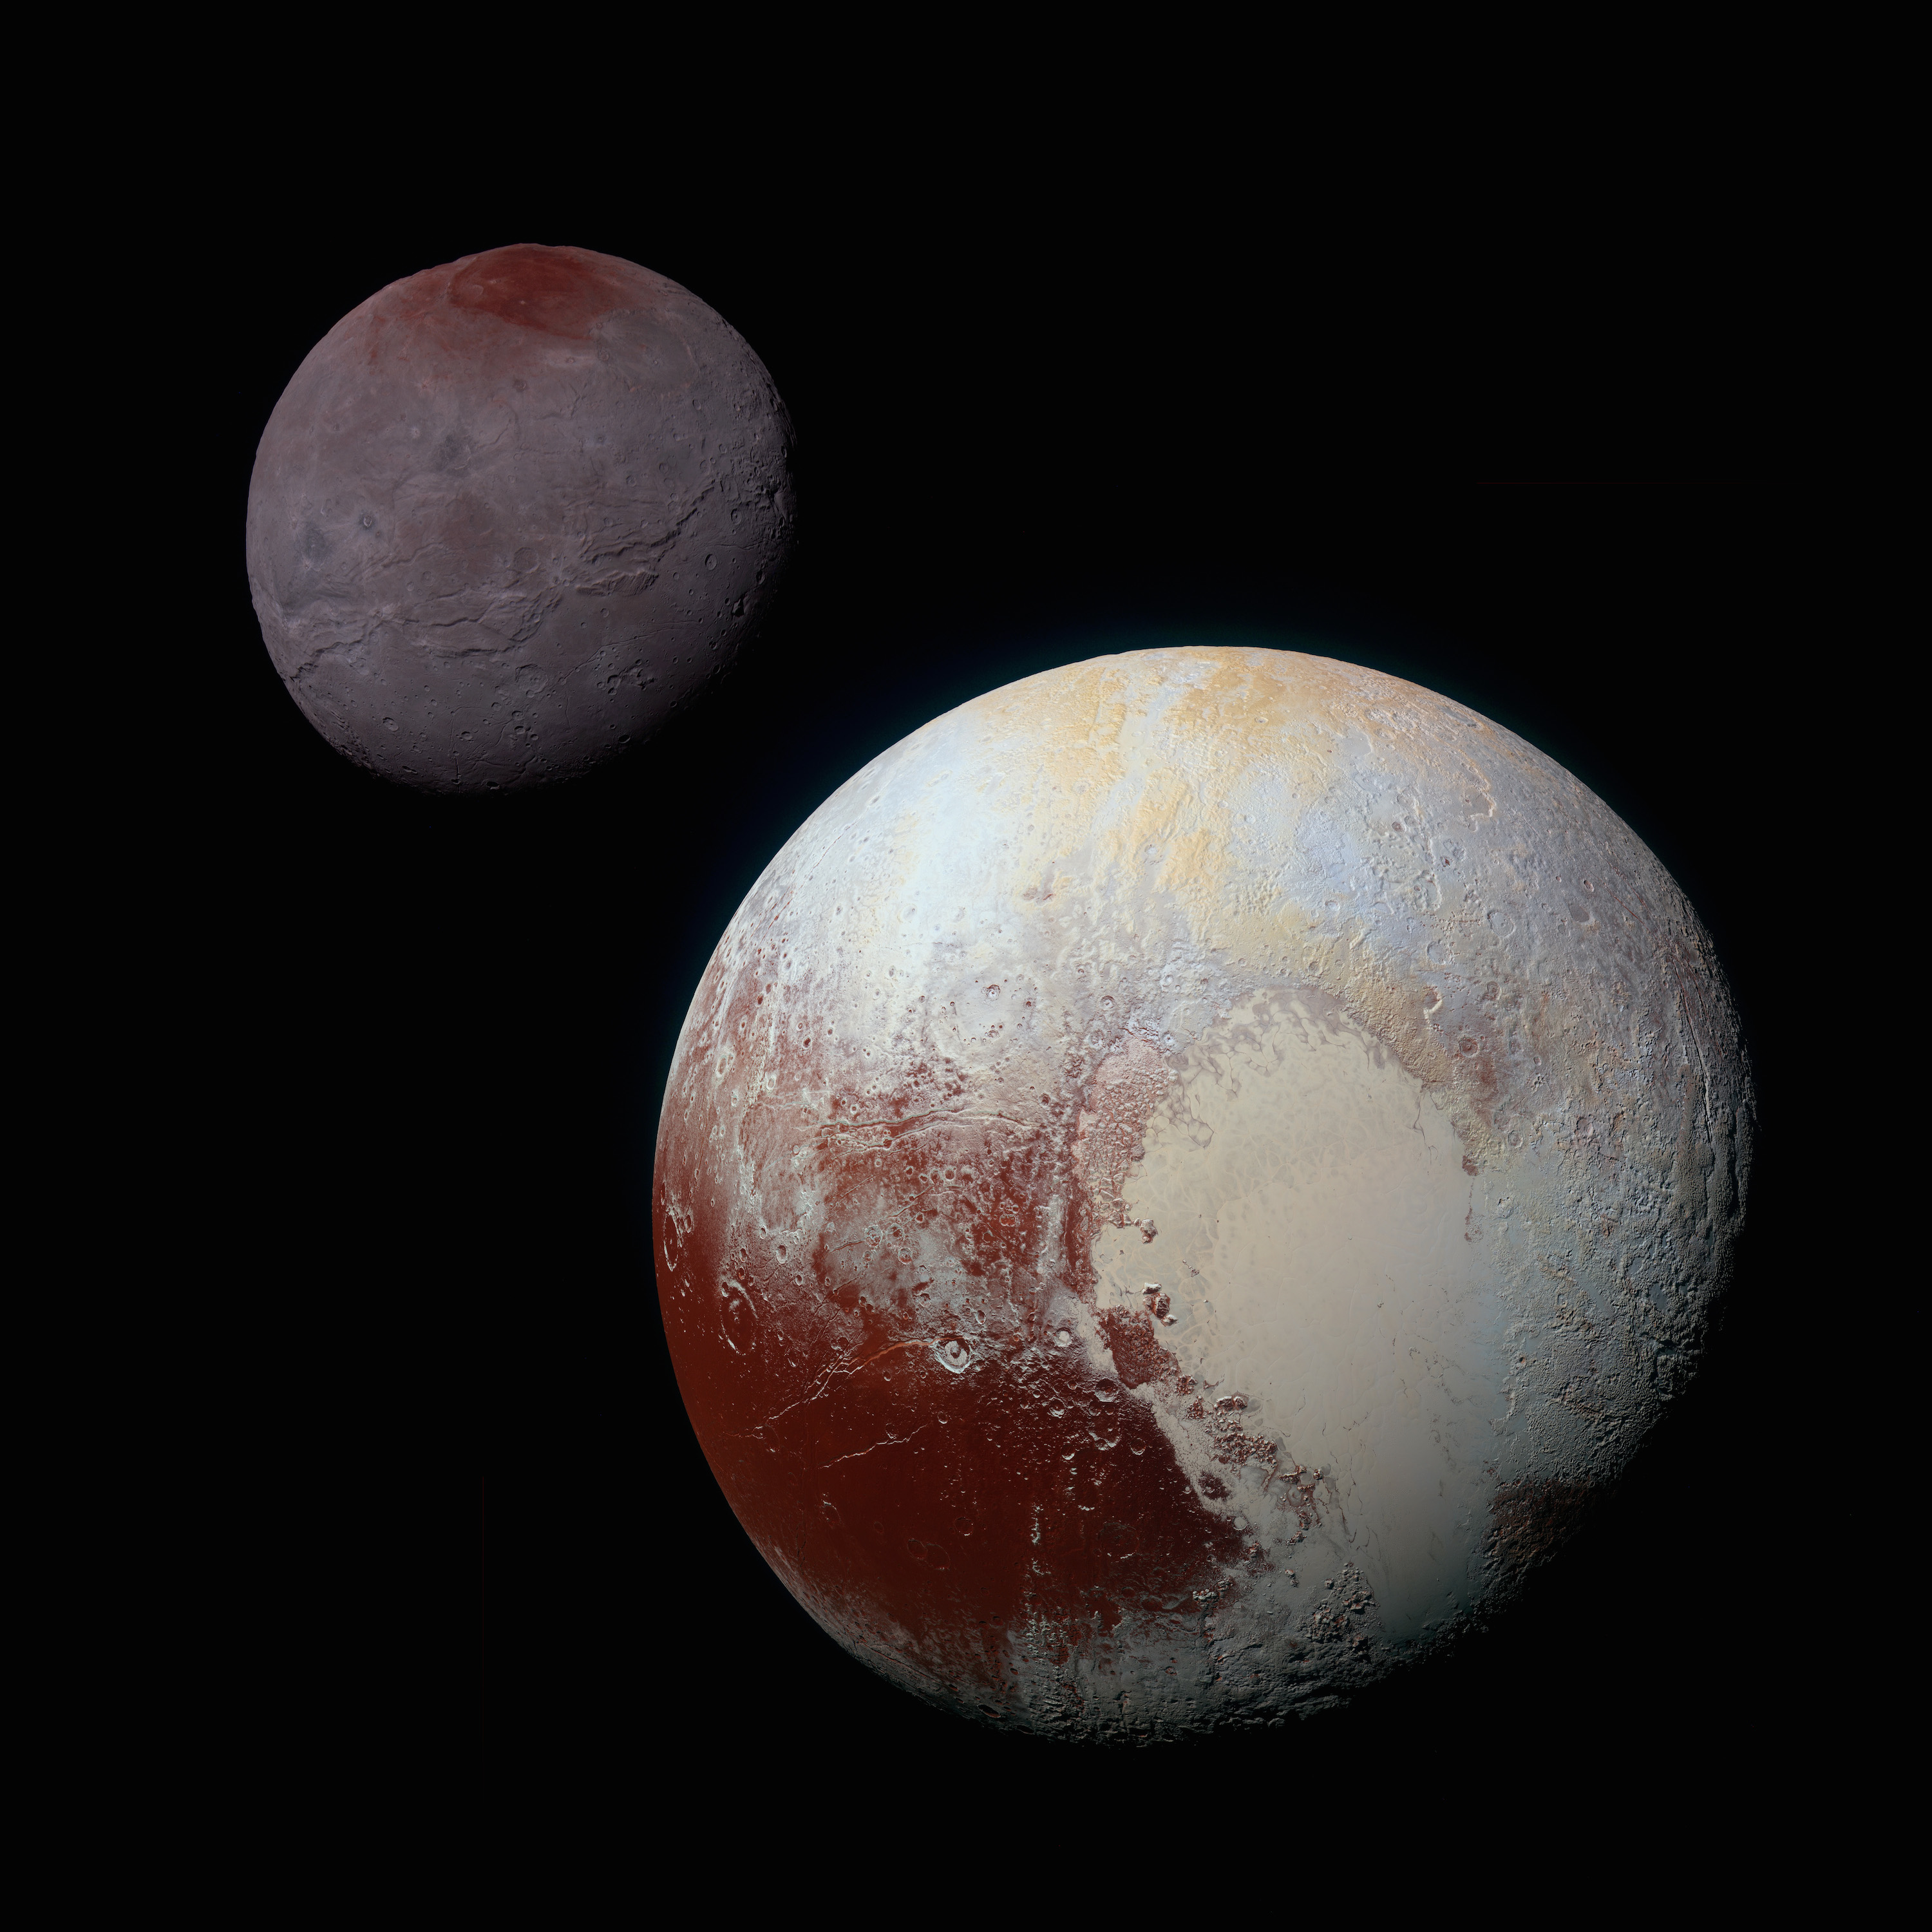 Charon (top) and Pluto are only separated by 12,000 or so miles (image credit: NASA-JHUAPL-SwRI).